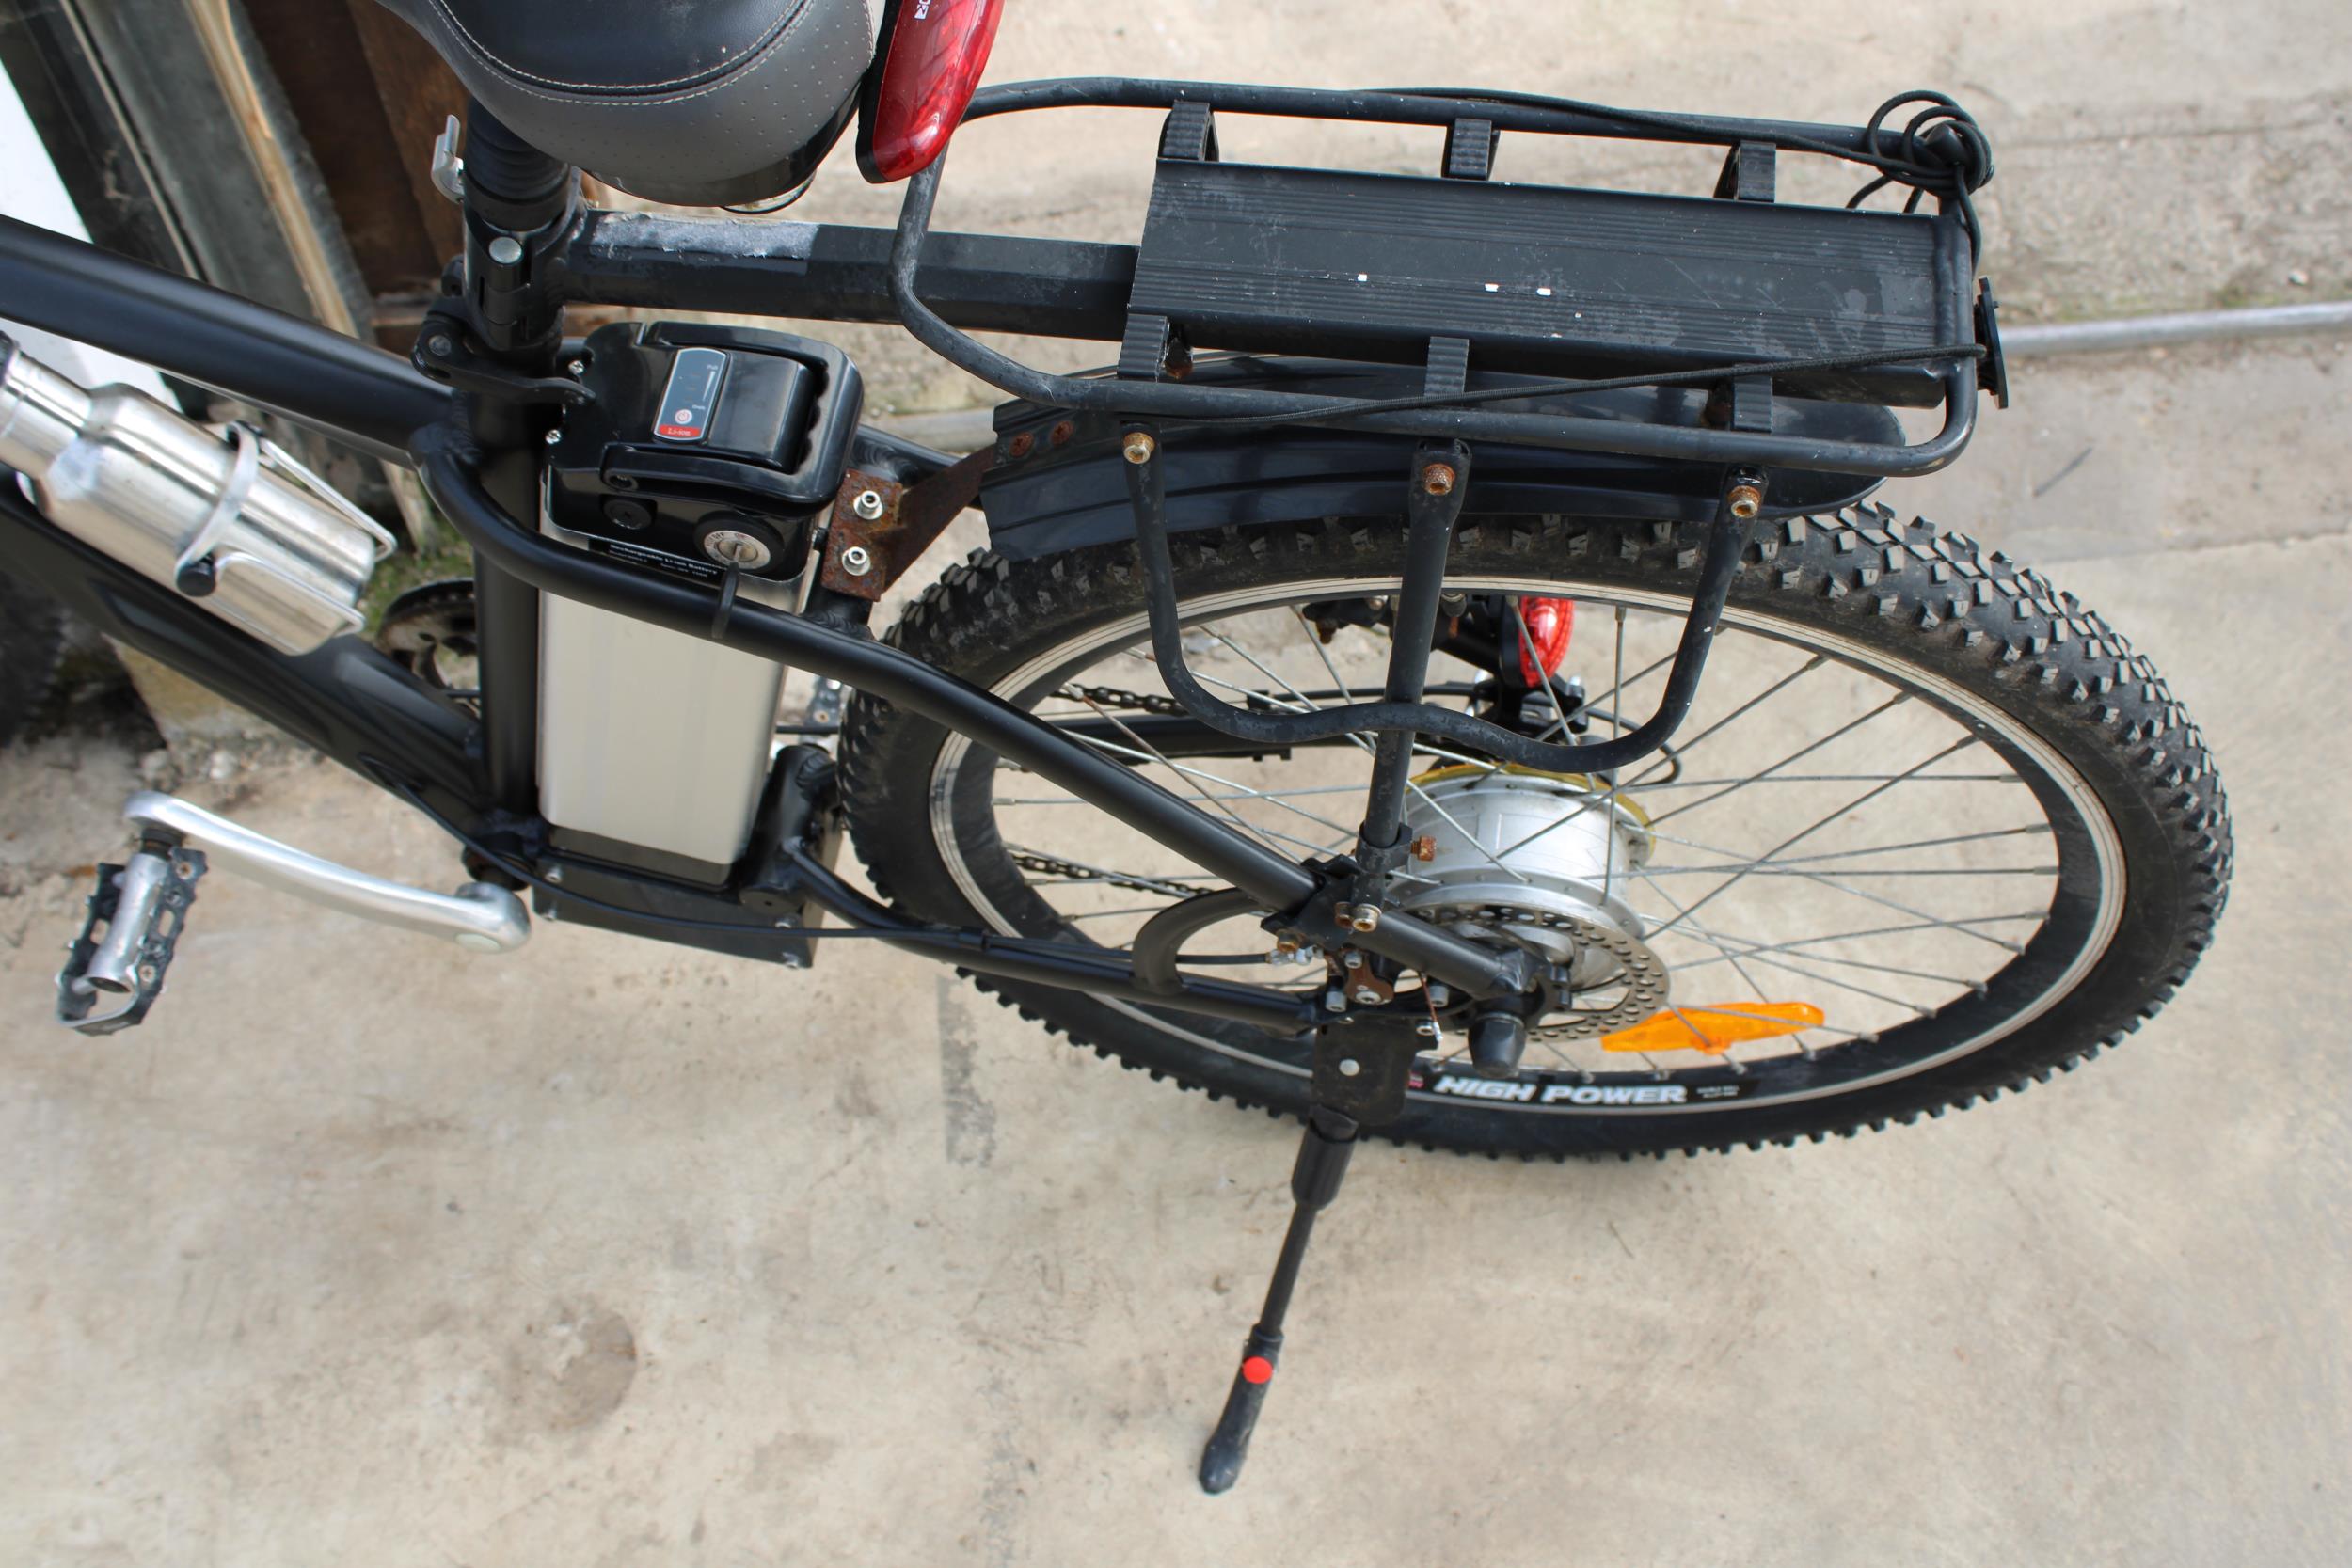 A DR.BIKE ELECTRIC ASSISTED GENTS MOUNTAIN BIKE WITH FRONT SUSPENSION, DISC BRAKES AND 6 SPEED - Image 5 of 7